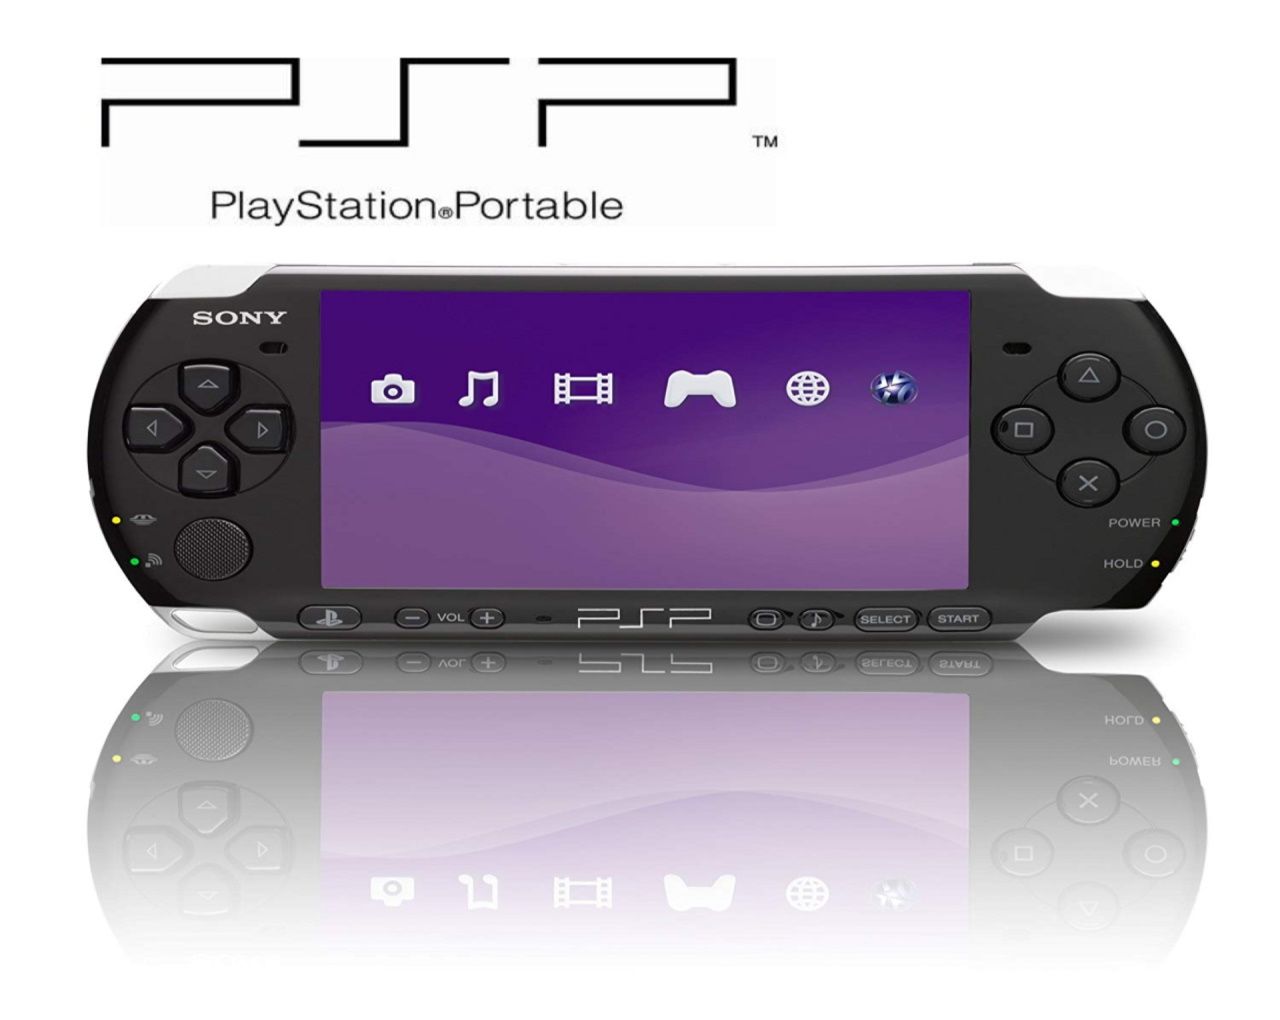 How to Buy PSP Games on PS Vita and PS3